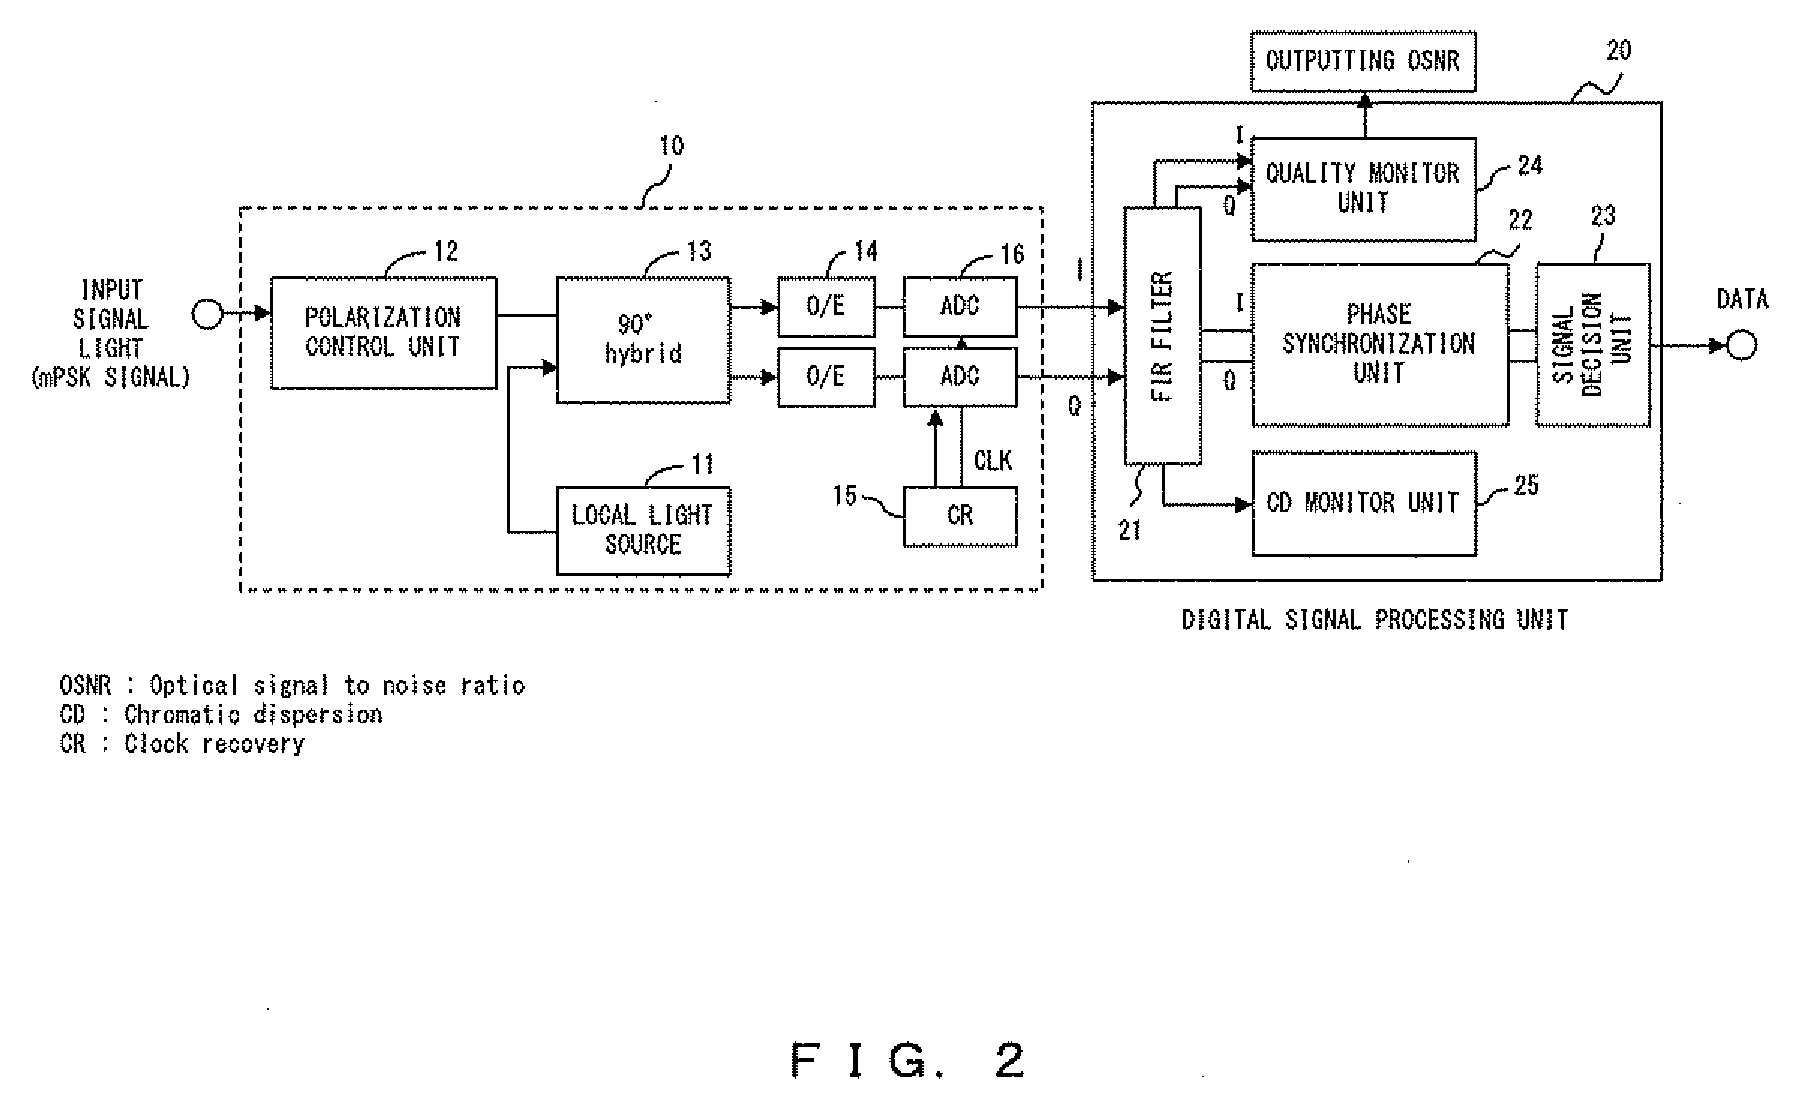 Monitor circuit for monitoring property of optical fiber transmission line and quality of optical signal